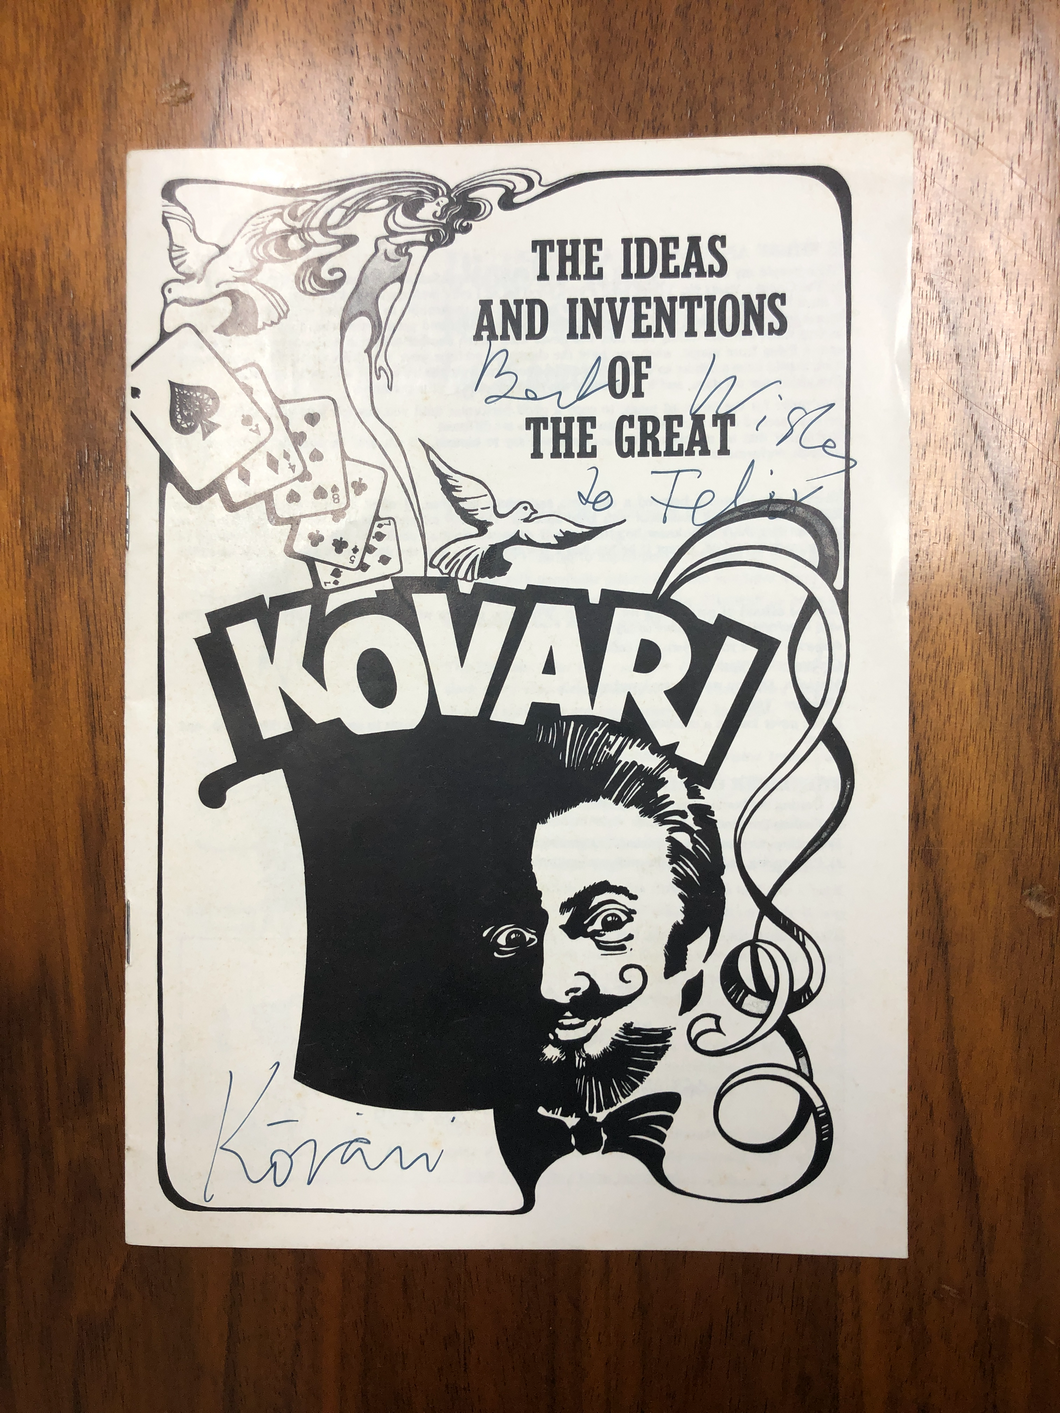 The ideas and inventions of the great Kovari (autographed)